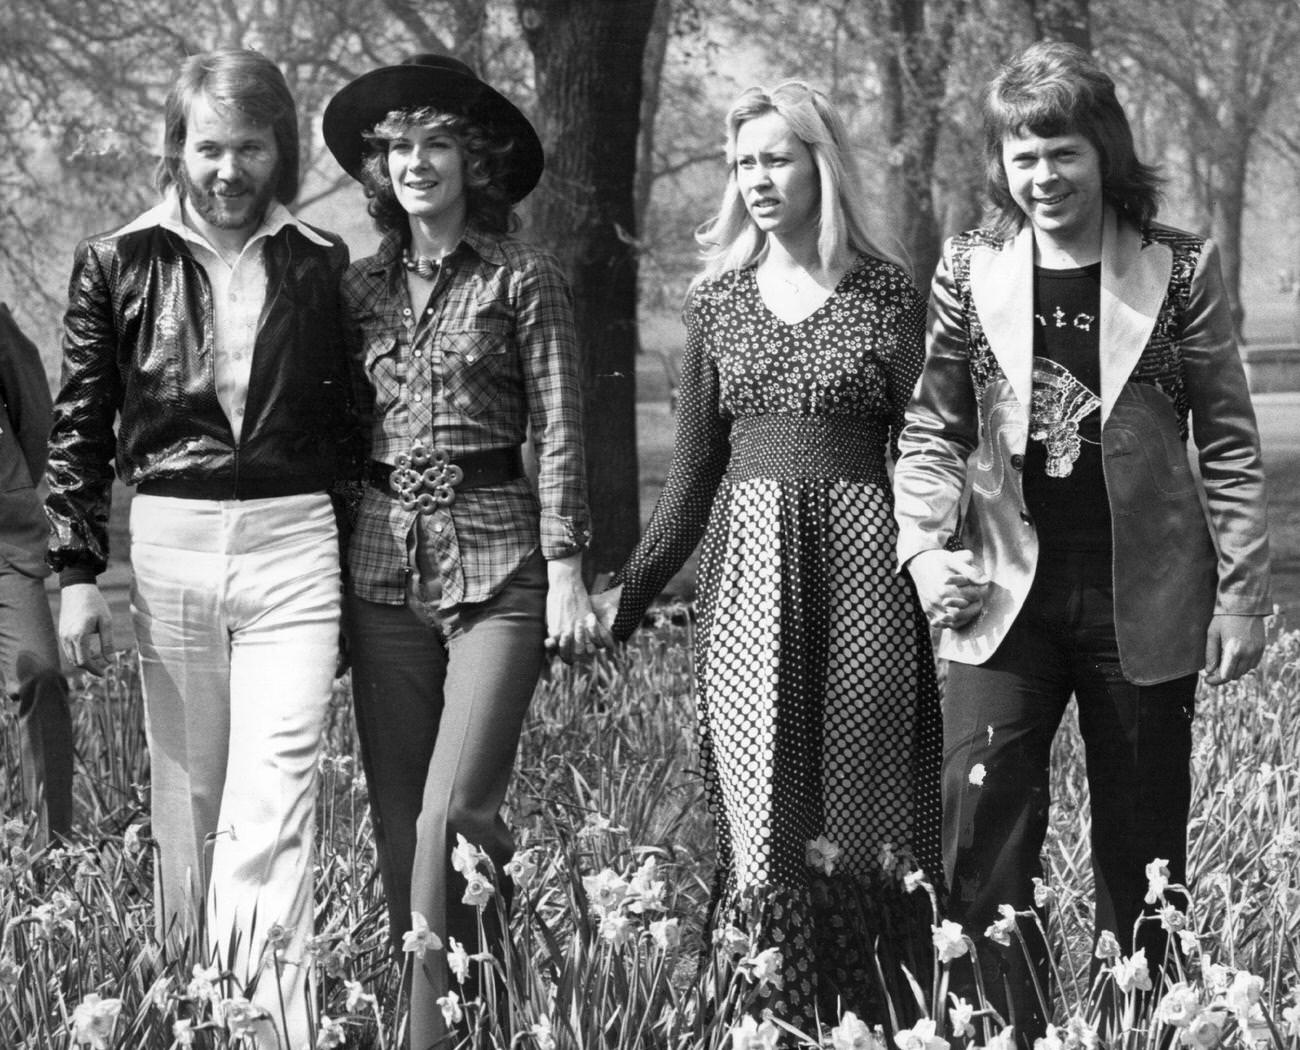 Abba, winners of the 1974 Eurovision Song Contest at Brighton, strolling hand in hand amongst the daffodils in Hyde Park, London.